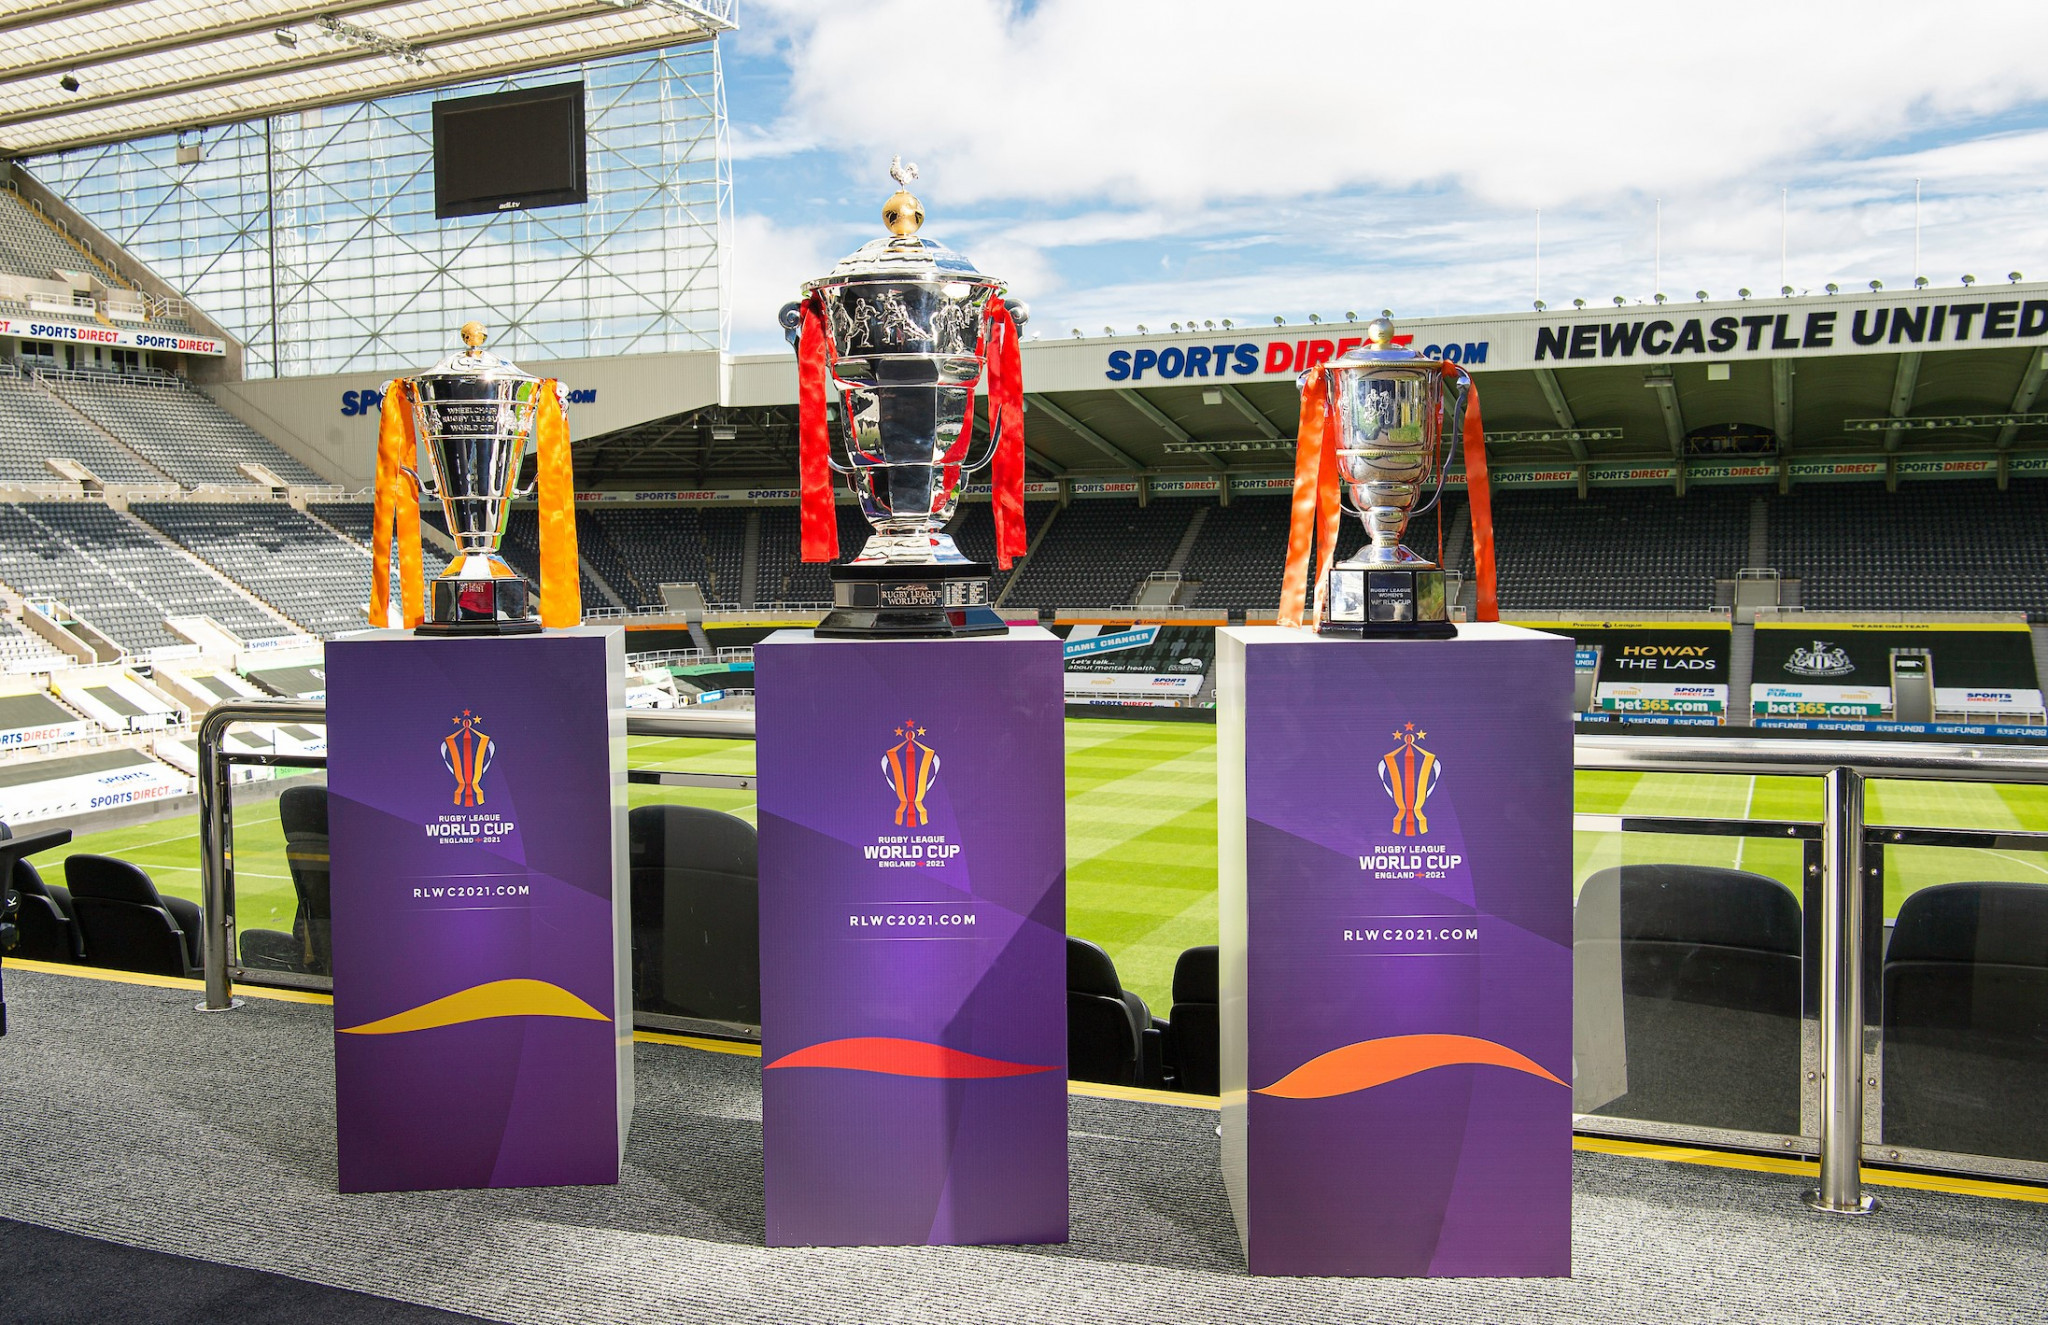 Changes will not be made until after the 2021 Rugby League World Cup in England  ©RLWC2021